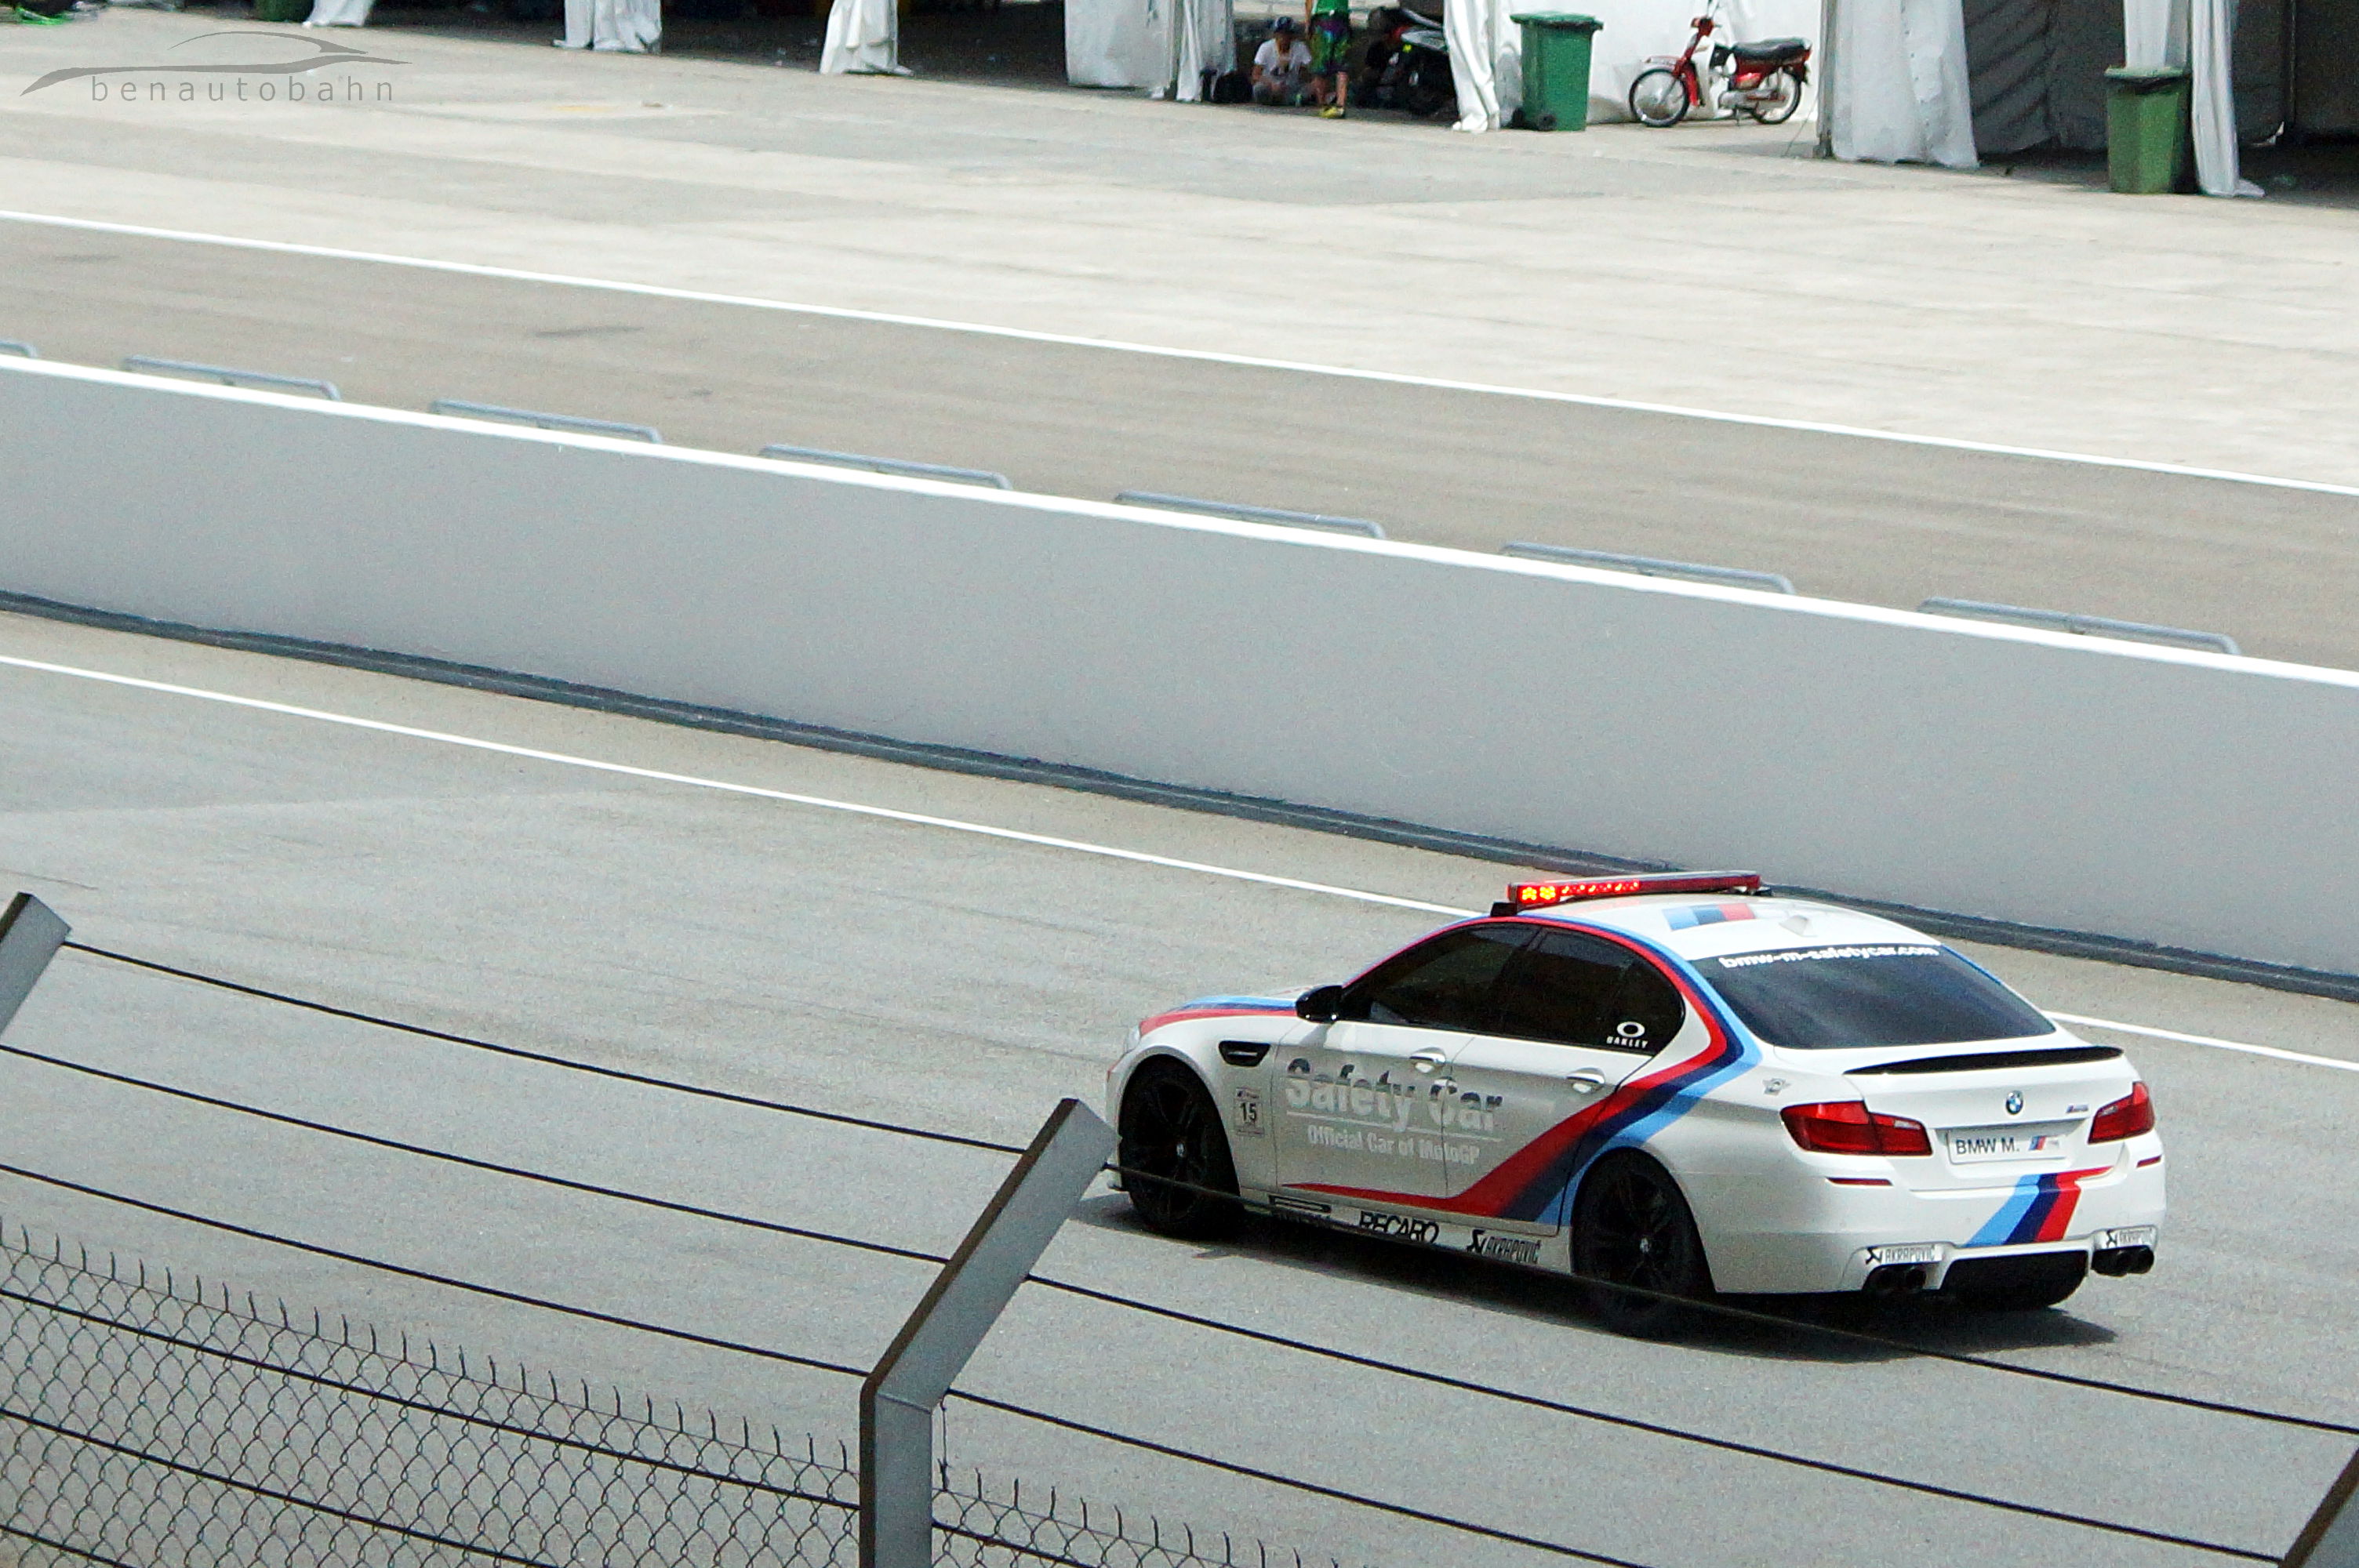 The BMW ///M5 Safety Car was the last vehicle to leave the scene